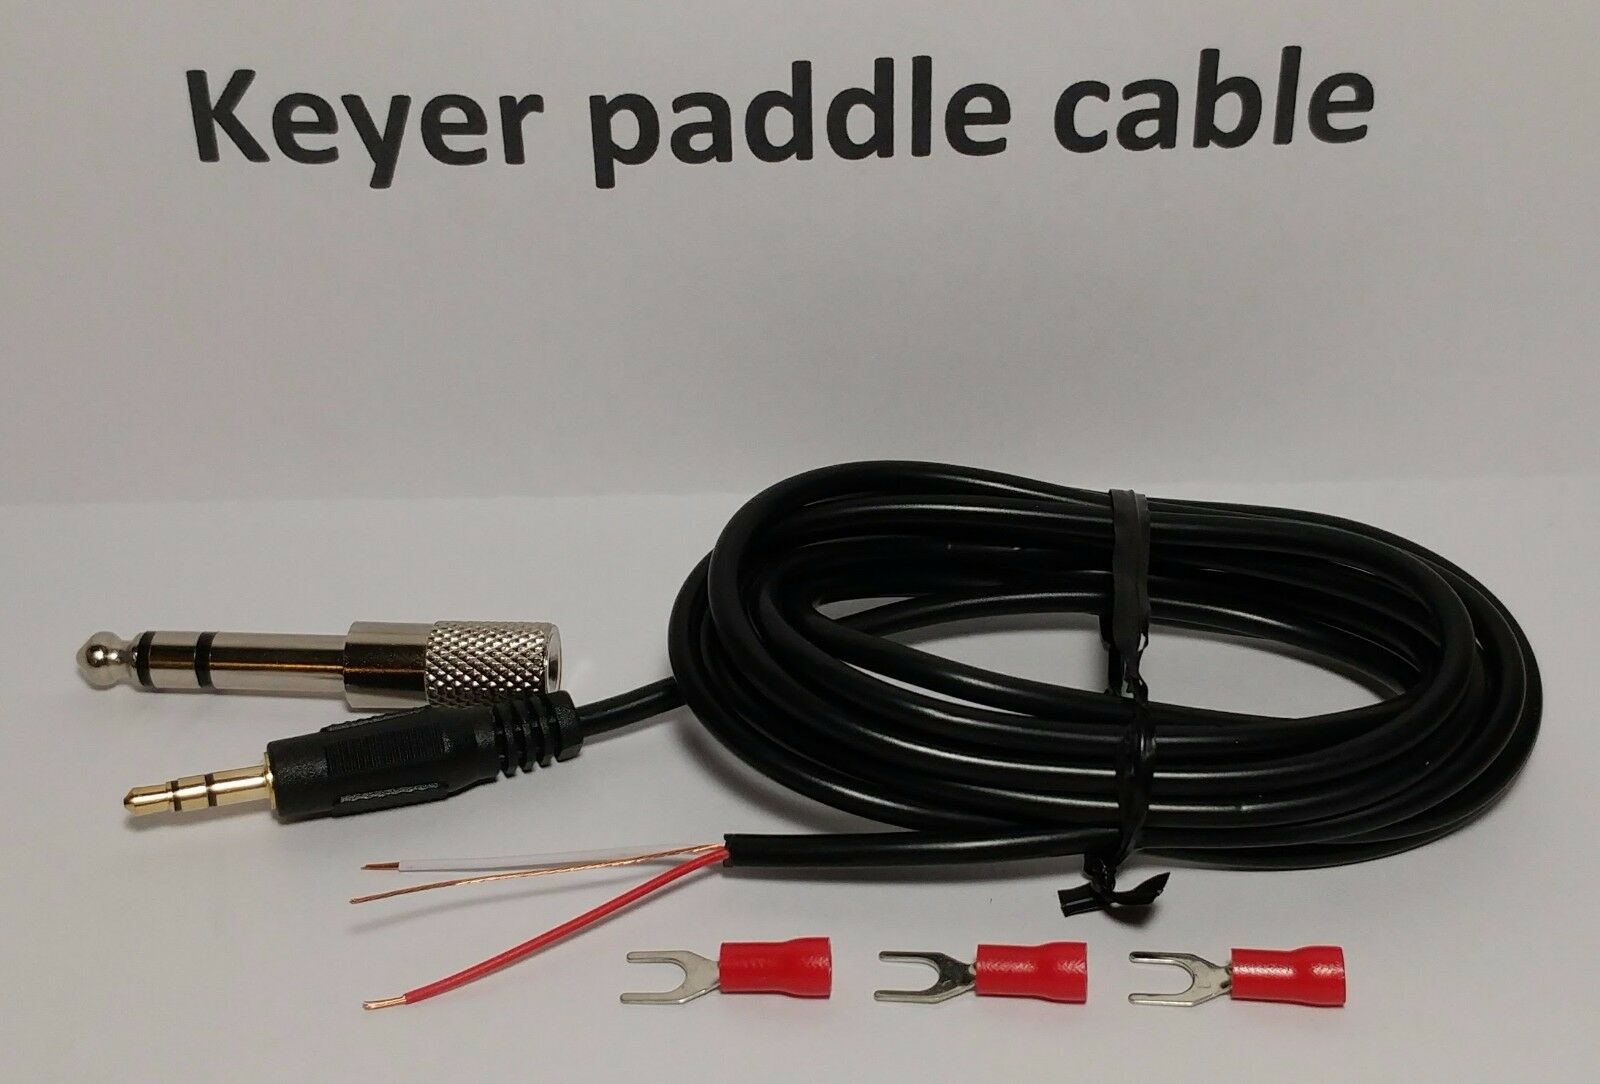 Cw Keyer Paddle Cable 6 Feet 1/4" (6.35mm) 1/8" (3.5mm), Straight Key Morse Code